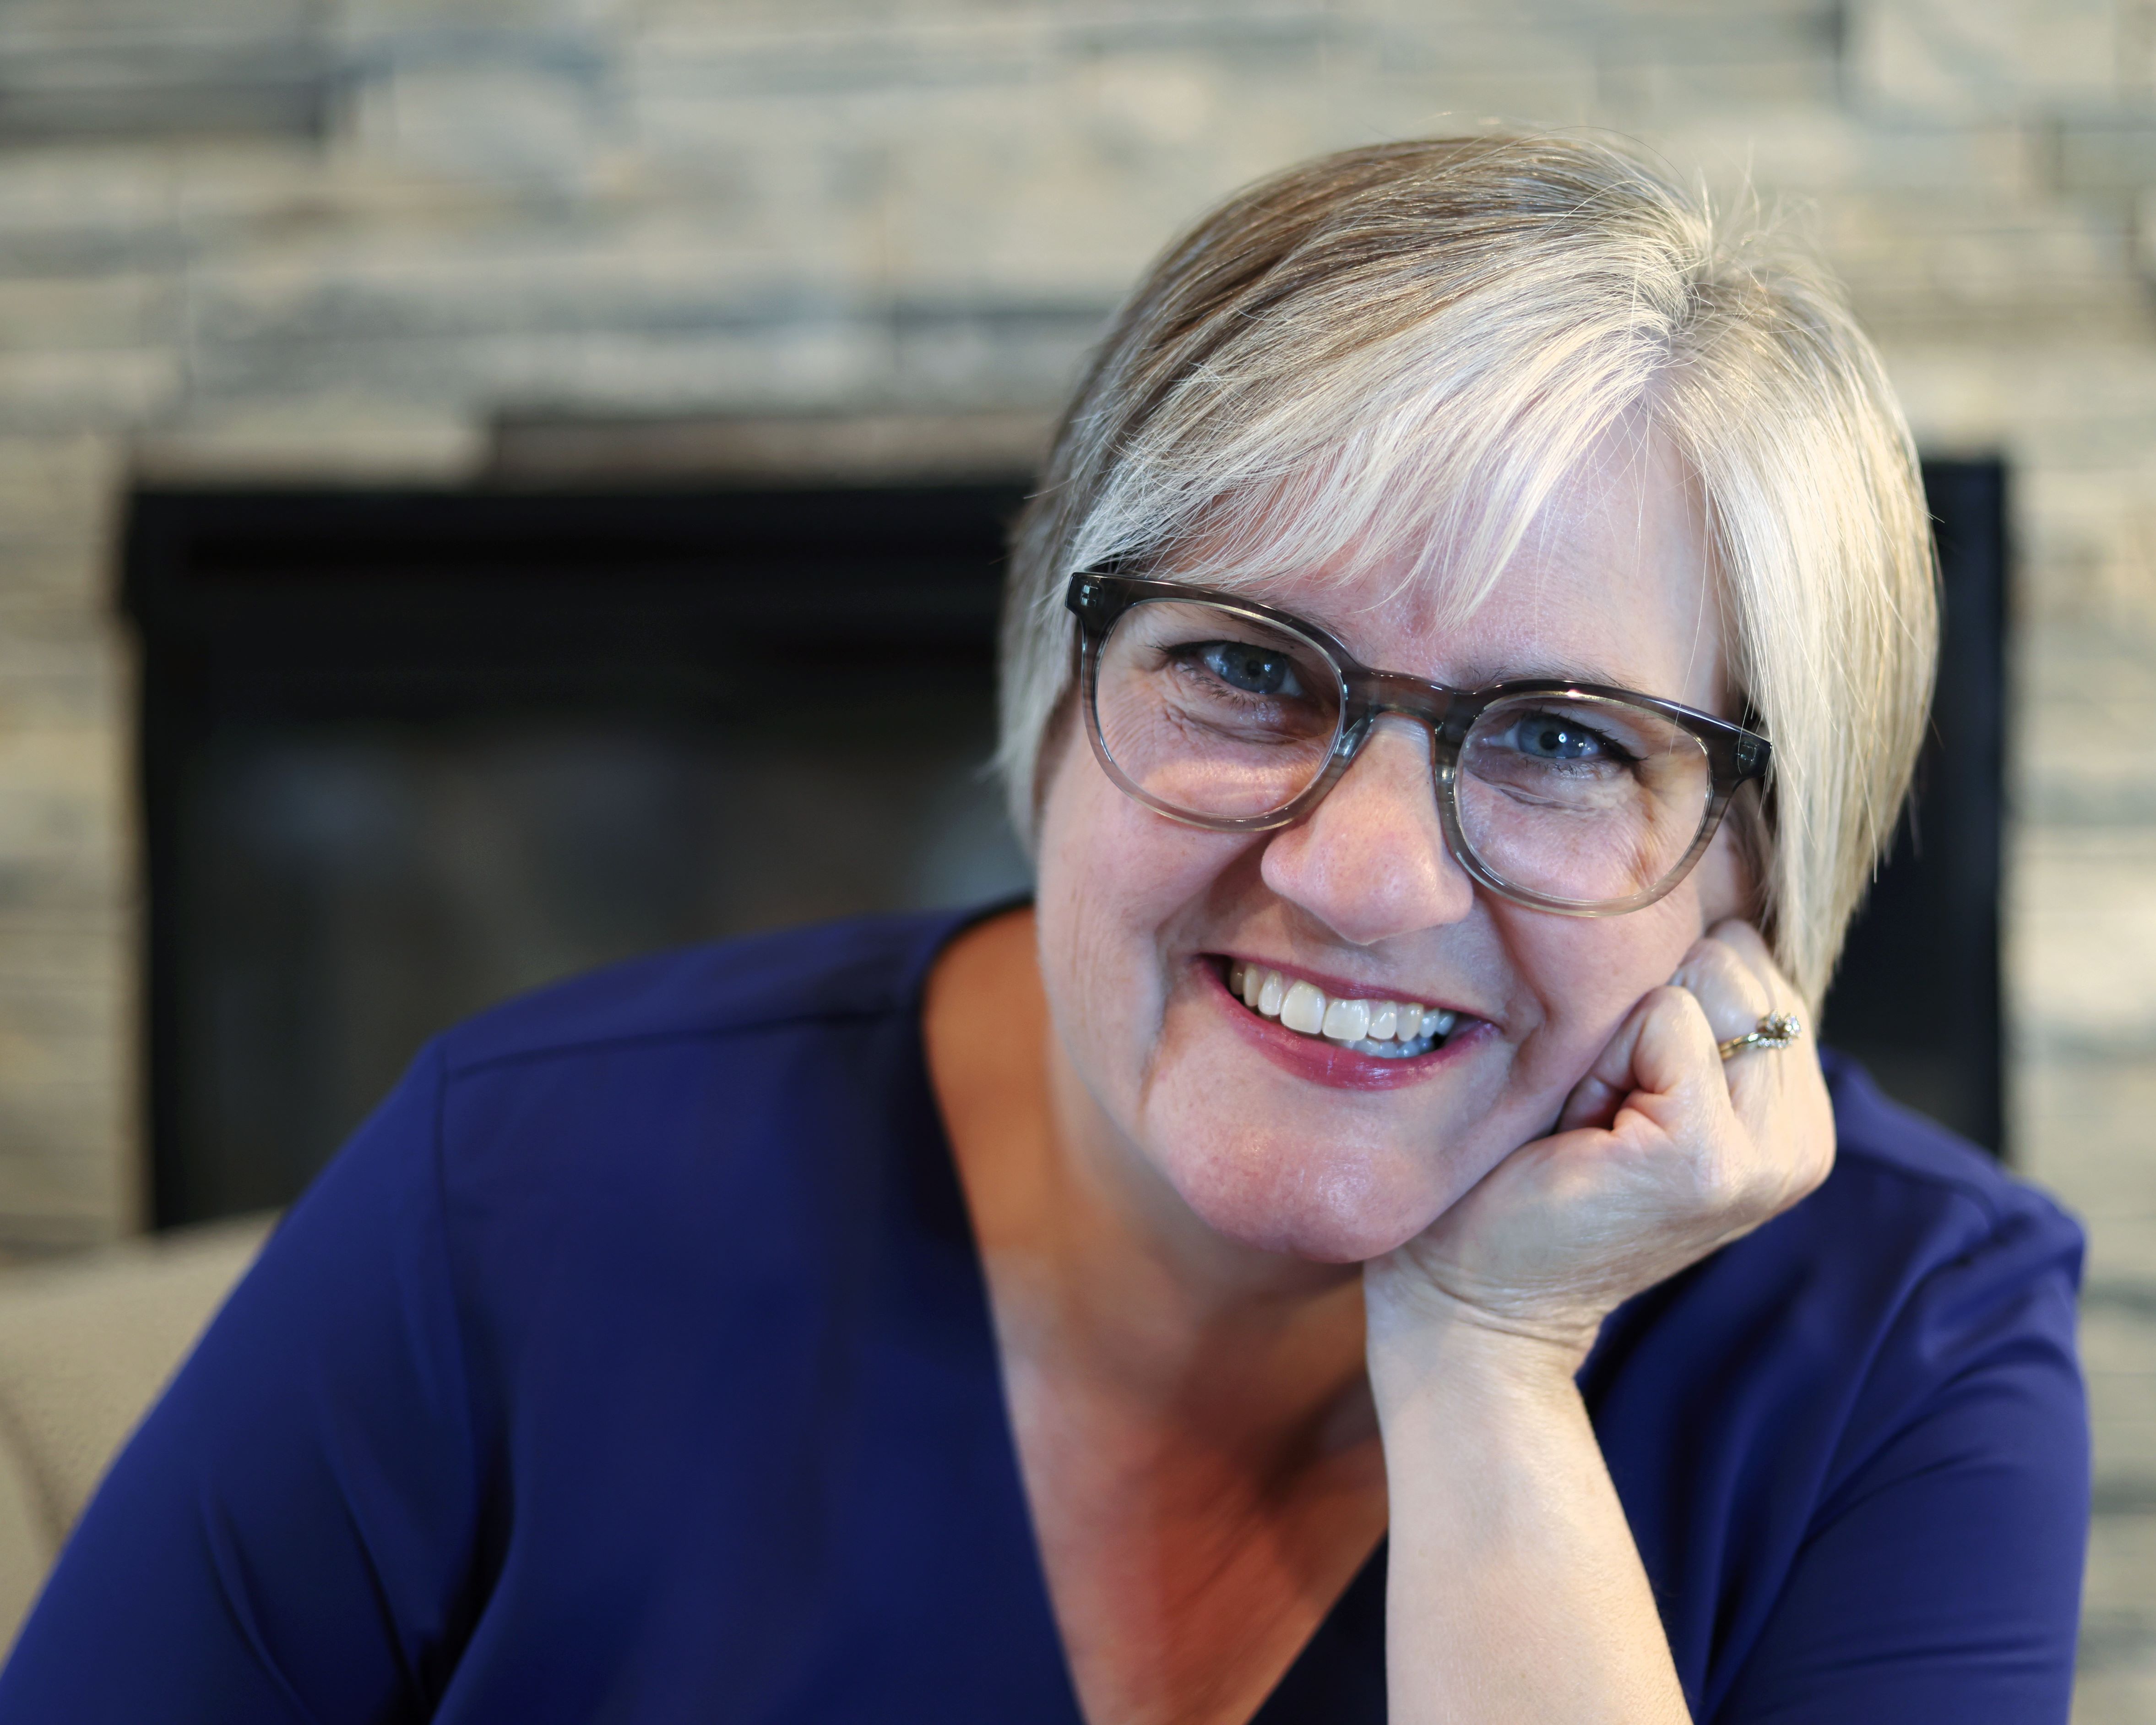 Smiling woman with short blonde hair, blue eyes, and glasses wearing a royal blue shirt in front of a fireplace